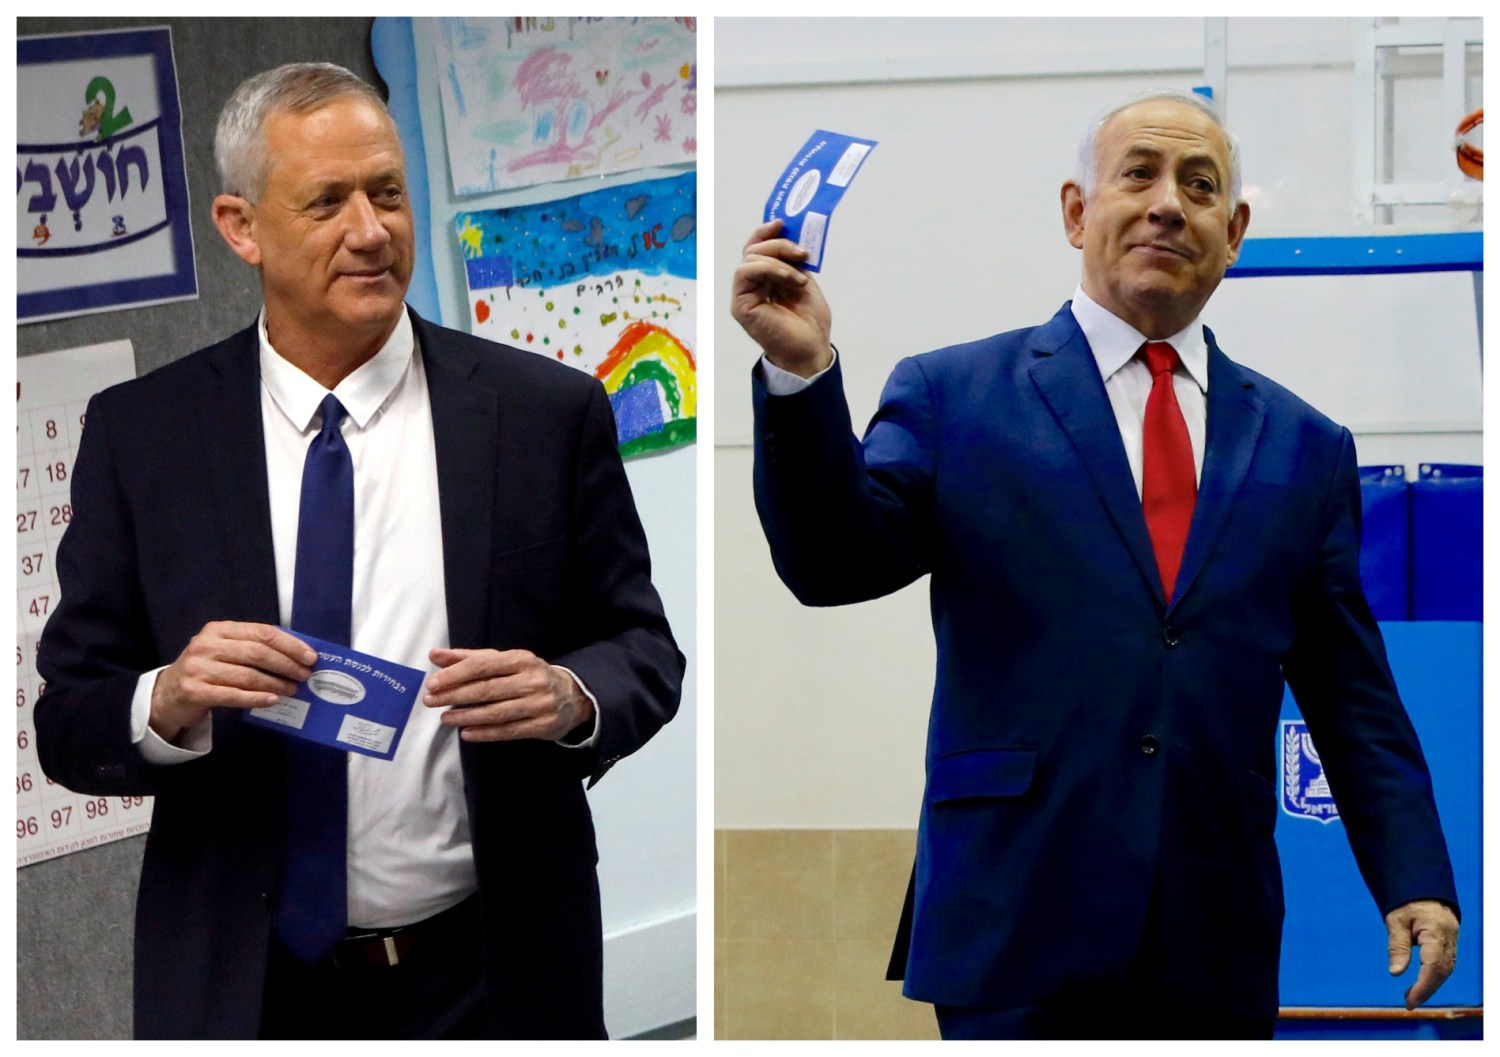 A combination picture shows Benny Gantz (left), leader of Blue and White party voting at a polling station in Rosh Ha'ayin and Israels Prime Minister Benjamin Netanyahu voting at a polling station in Jerusalem during Israel's parliamentary election April 9, 2019. REUTERS/Nir Elias, Ariel Schalit/Pool via REUTERS - RC122F5D90F0